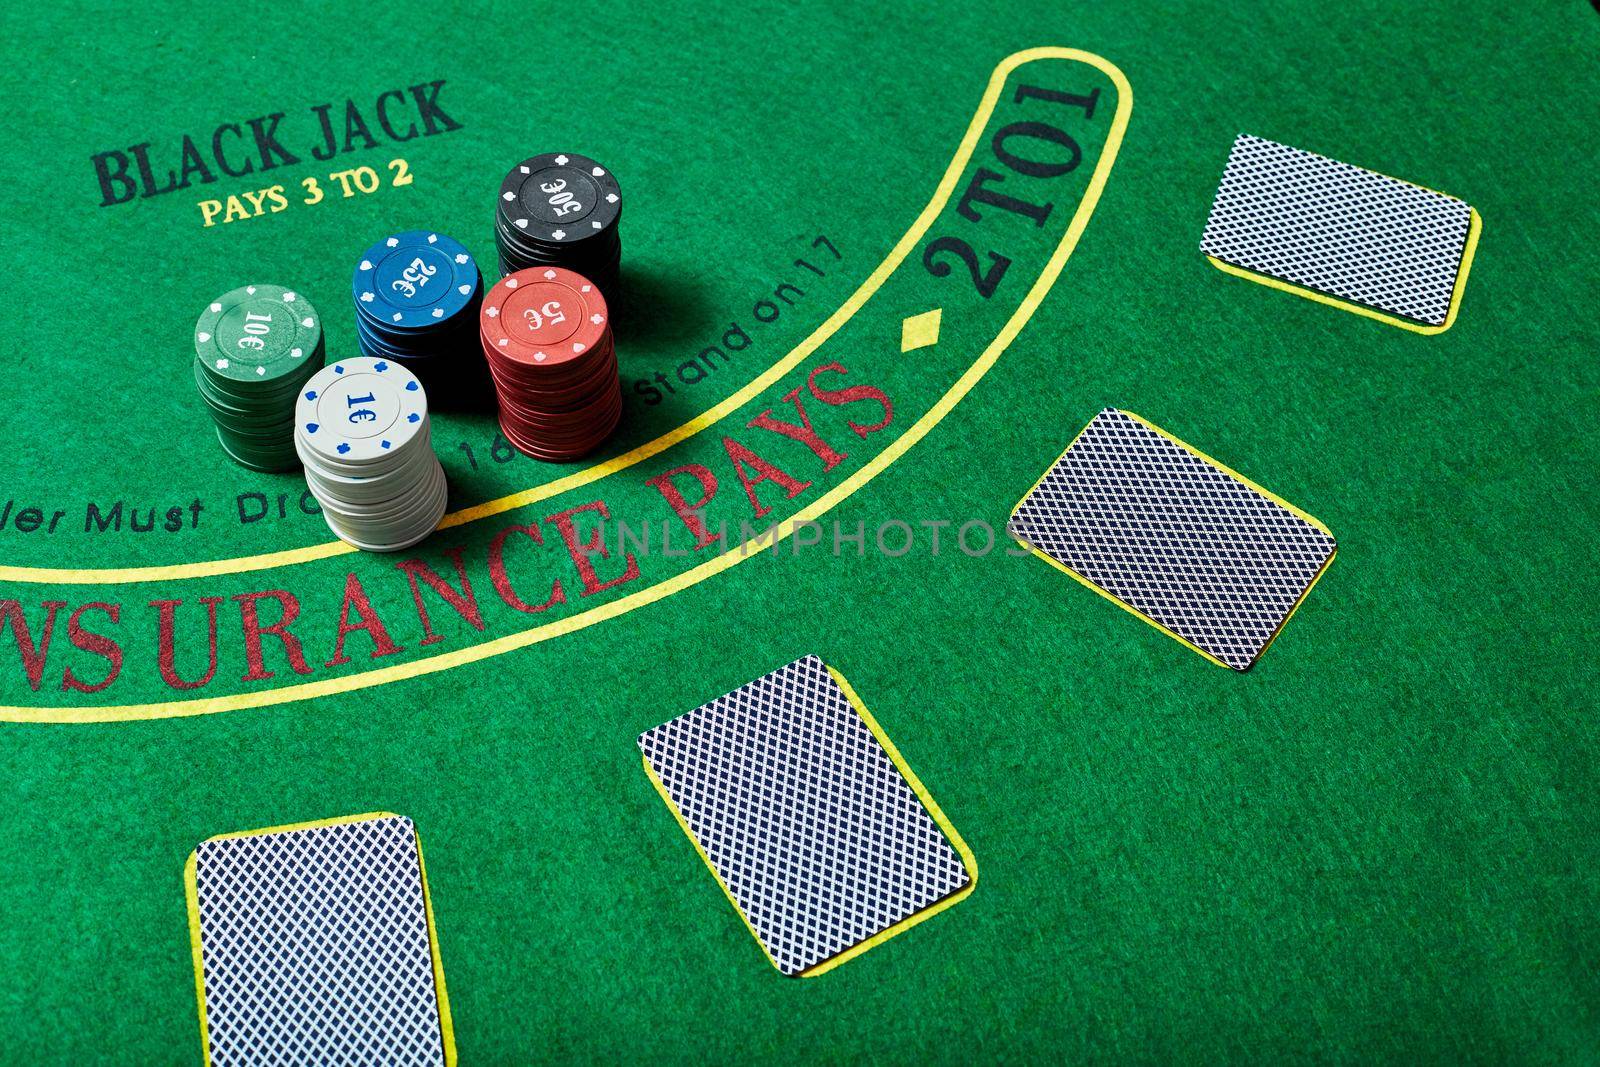 Casino chips and deck of cards lying on green casino table, poker game concept, top view.